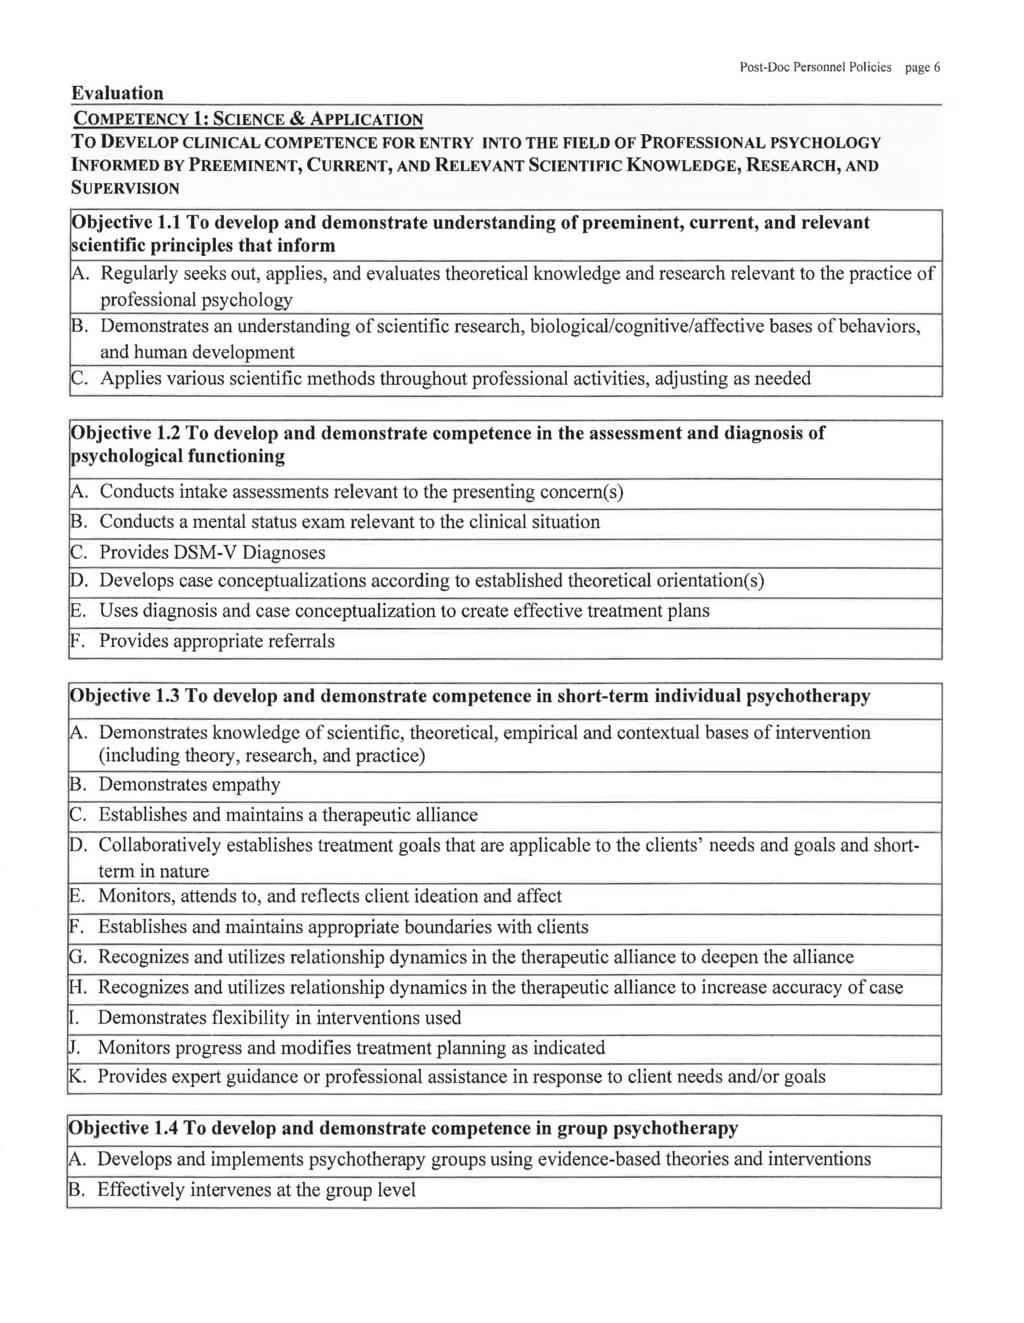 Evaluation COMPETENCY 1: SCIENCE & APPLICATION Post-Doc Personnel Policies page 6 TO DEVELOP CLINICAL COMPETENCE FOR ENTRY INTO THE FIELD OF PROFESSIONAL PSYCHOLOGY INFORMED BY PREEMINENT, CURRENT,